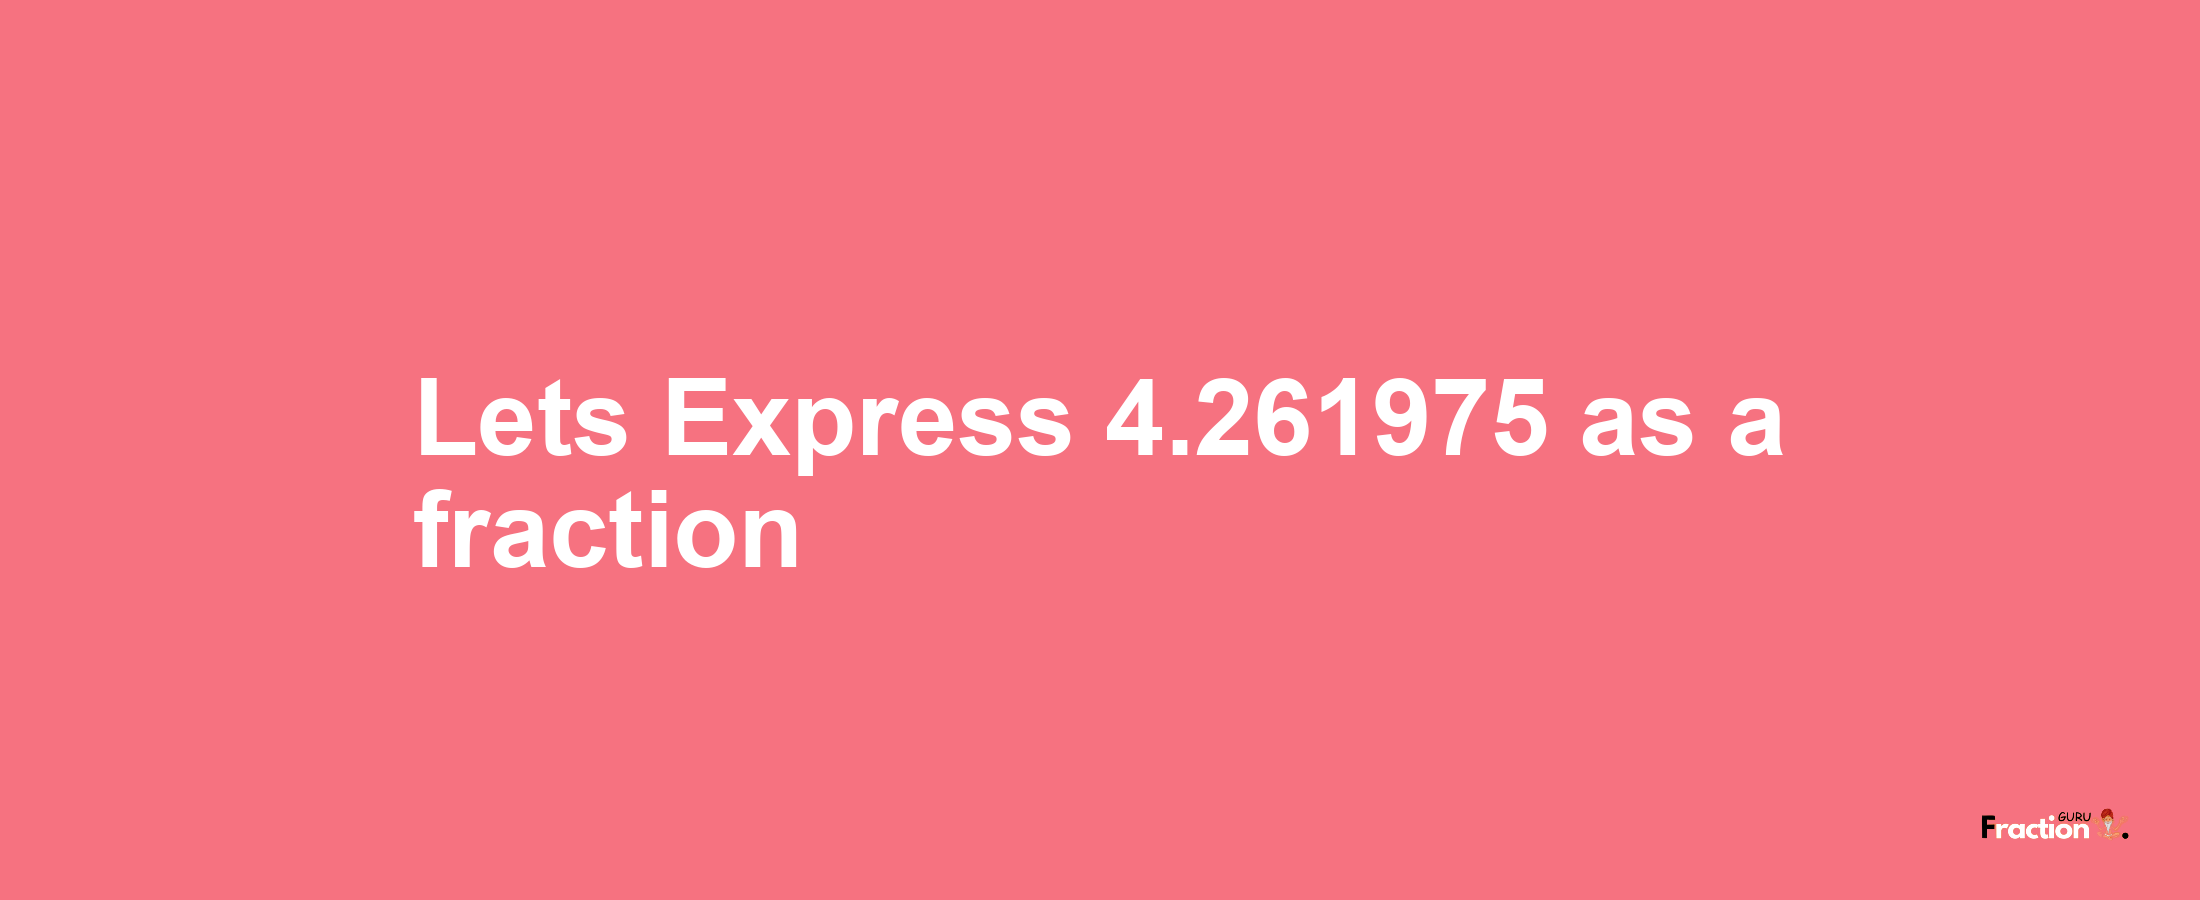 Lets Express 4.261975 as afraction